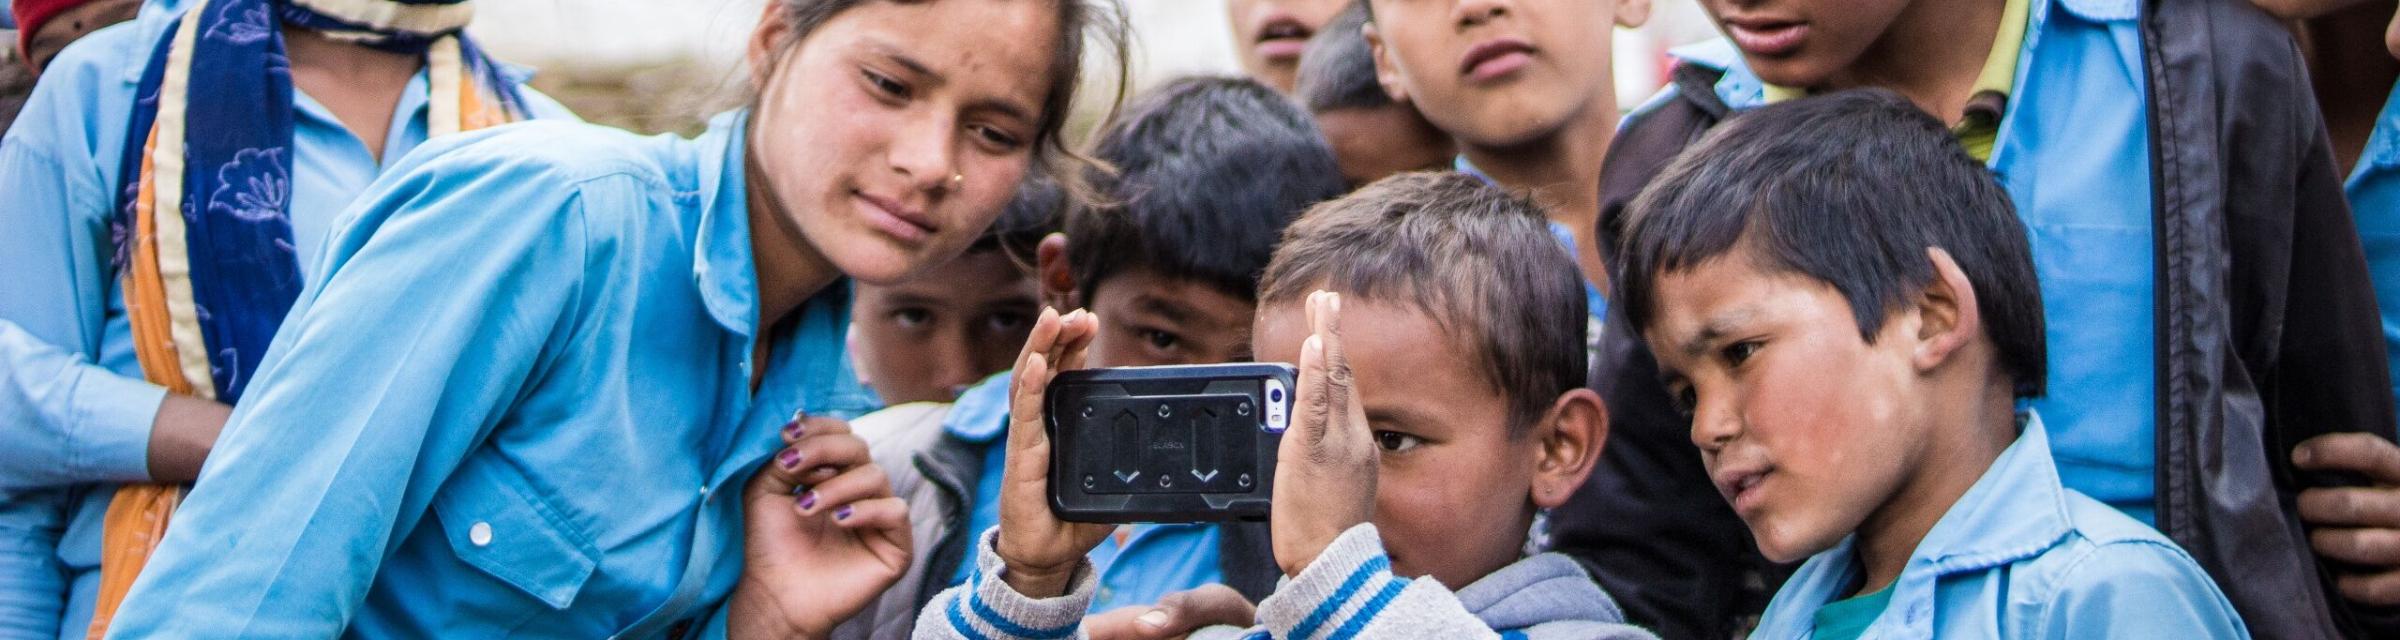 The use of cellphones is increasing, even in remote areas. This has also provided new ministry platforms to reach people with God's Word and discipleship materials. OM teams use the distribution of SD cards with Christian resources and the New Testament o